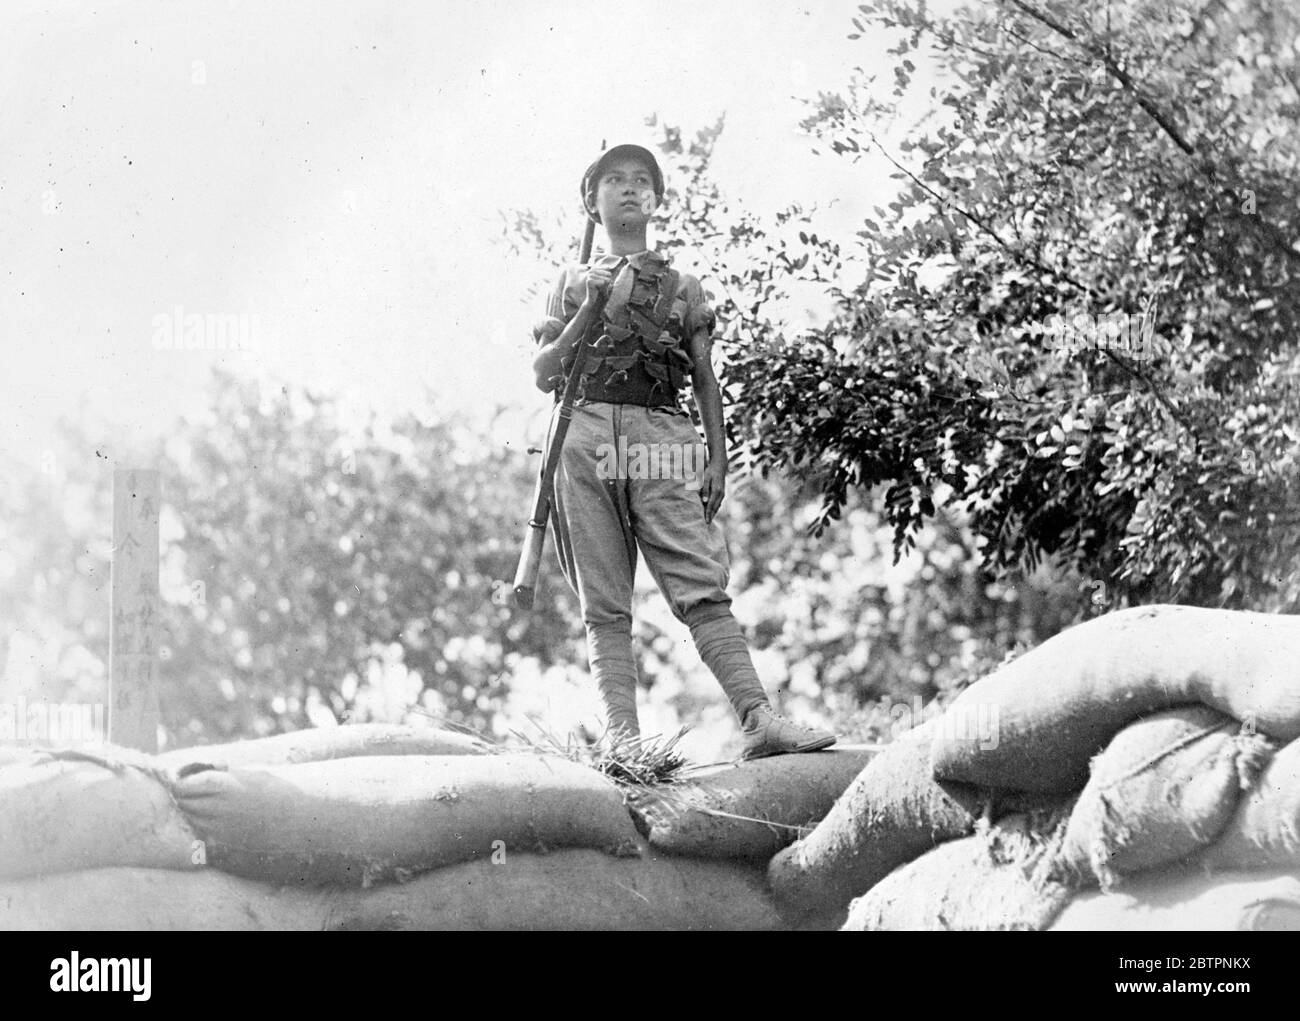 Girl soldier on the watch. China's fighting women defend their home. Centuries of grim struggle against adversity, of fighting against her, implacable enemy-nature-has fitted China's womanhood for the greatest battle-with the invading Japanese forces now menacing the entire nation. Women, their only uniform, a tattered shirt, trousers and, have joined China's non-descript armies around Shanghai in the North. Photo shows, a girl soldier, a rifle slung across the shoulder, keeping watch for a pile sandbags north of Shanghai. Stock Photo